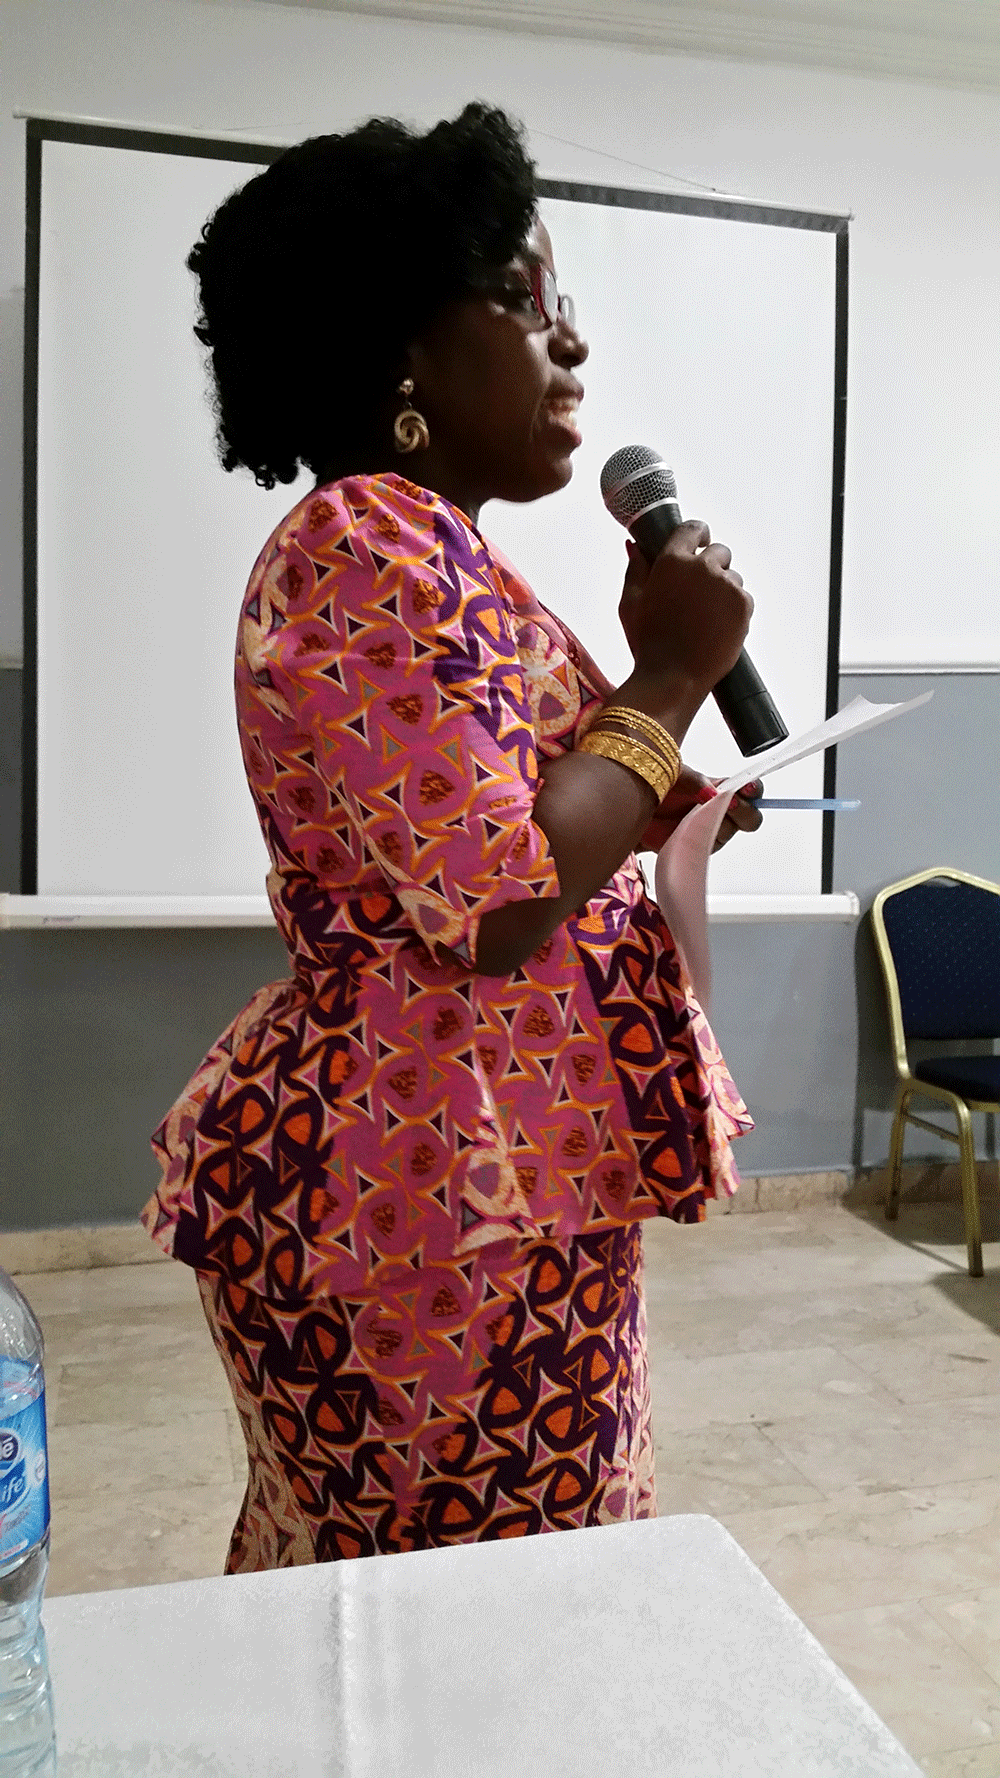 SPRING/Nigeria Chief of Party, Philomena Orji, provides closing remarks and a vote of thanks.